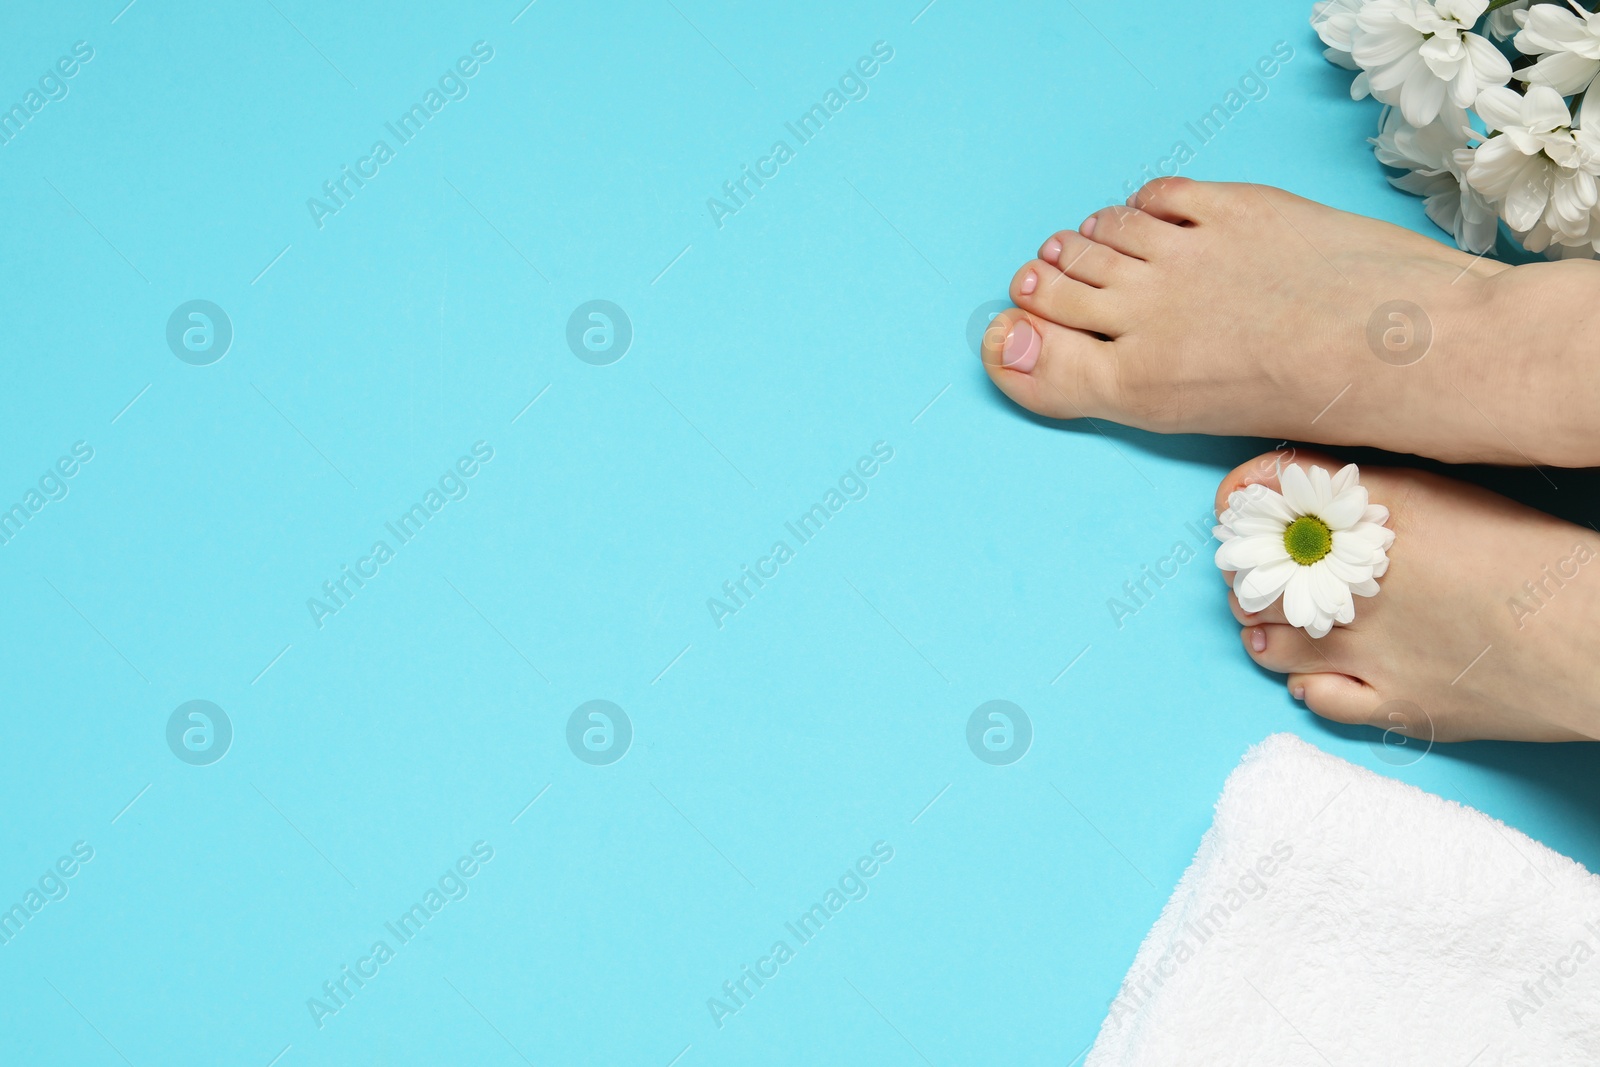 Photo of Closeup of woman with neat toenails after pedicure procedure on light blue background, top view. Space for text